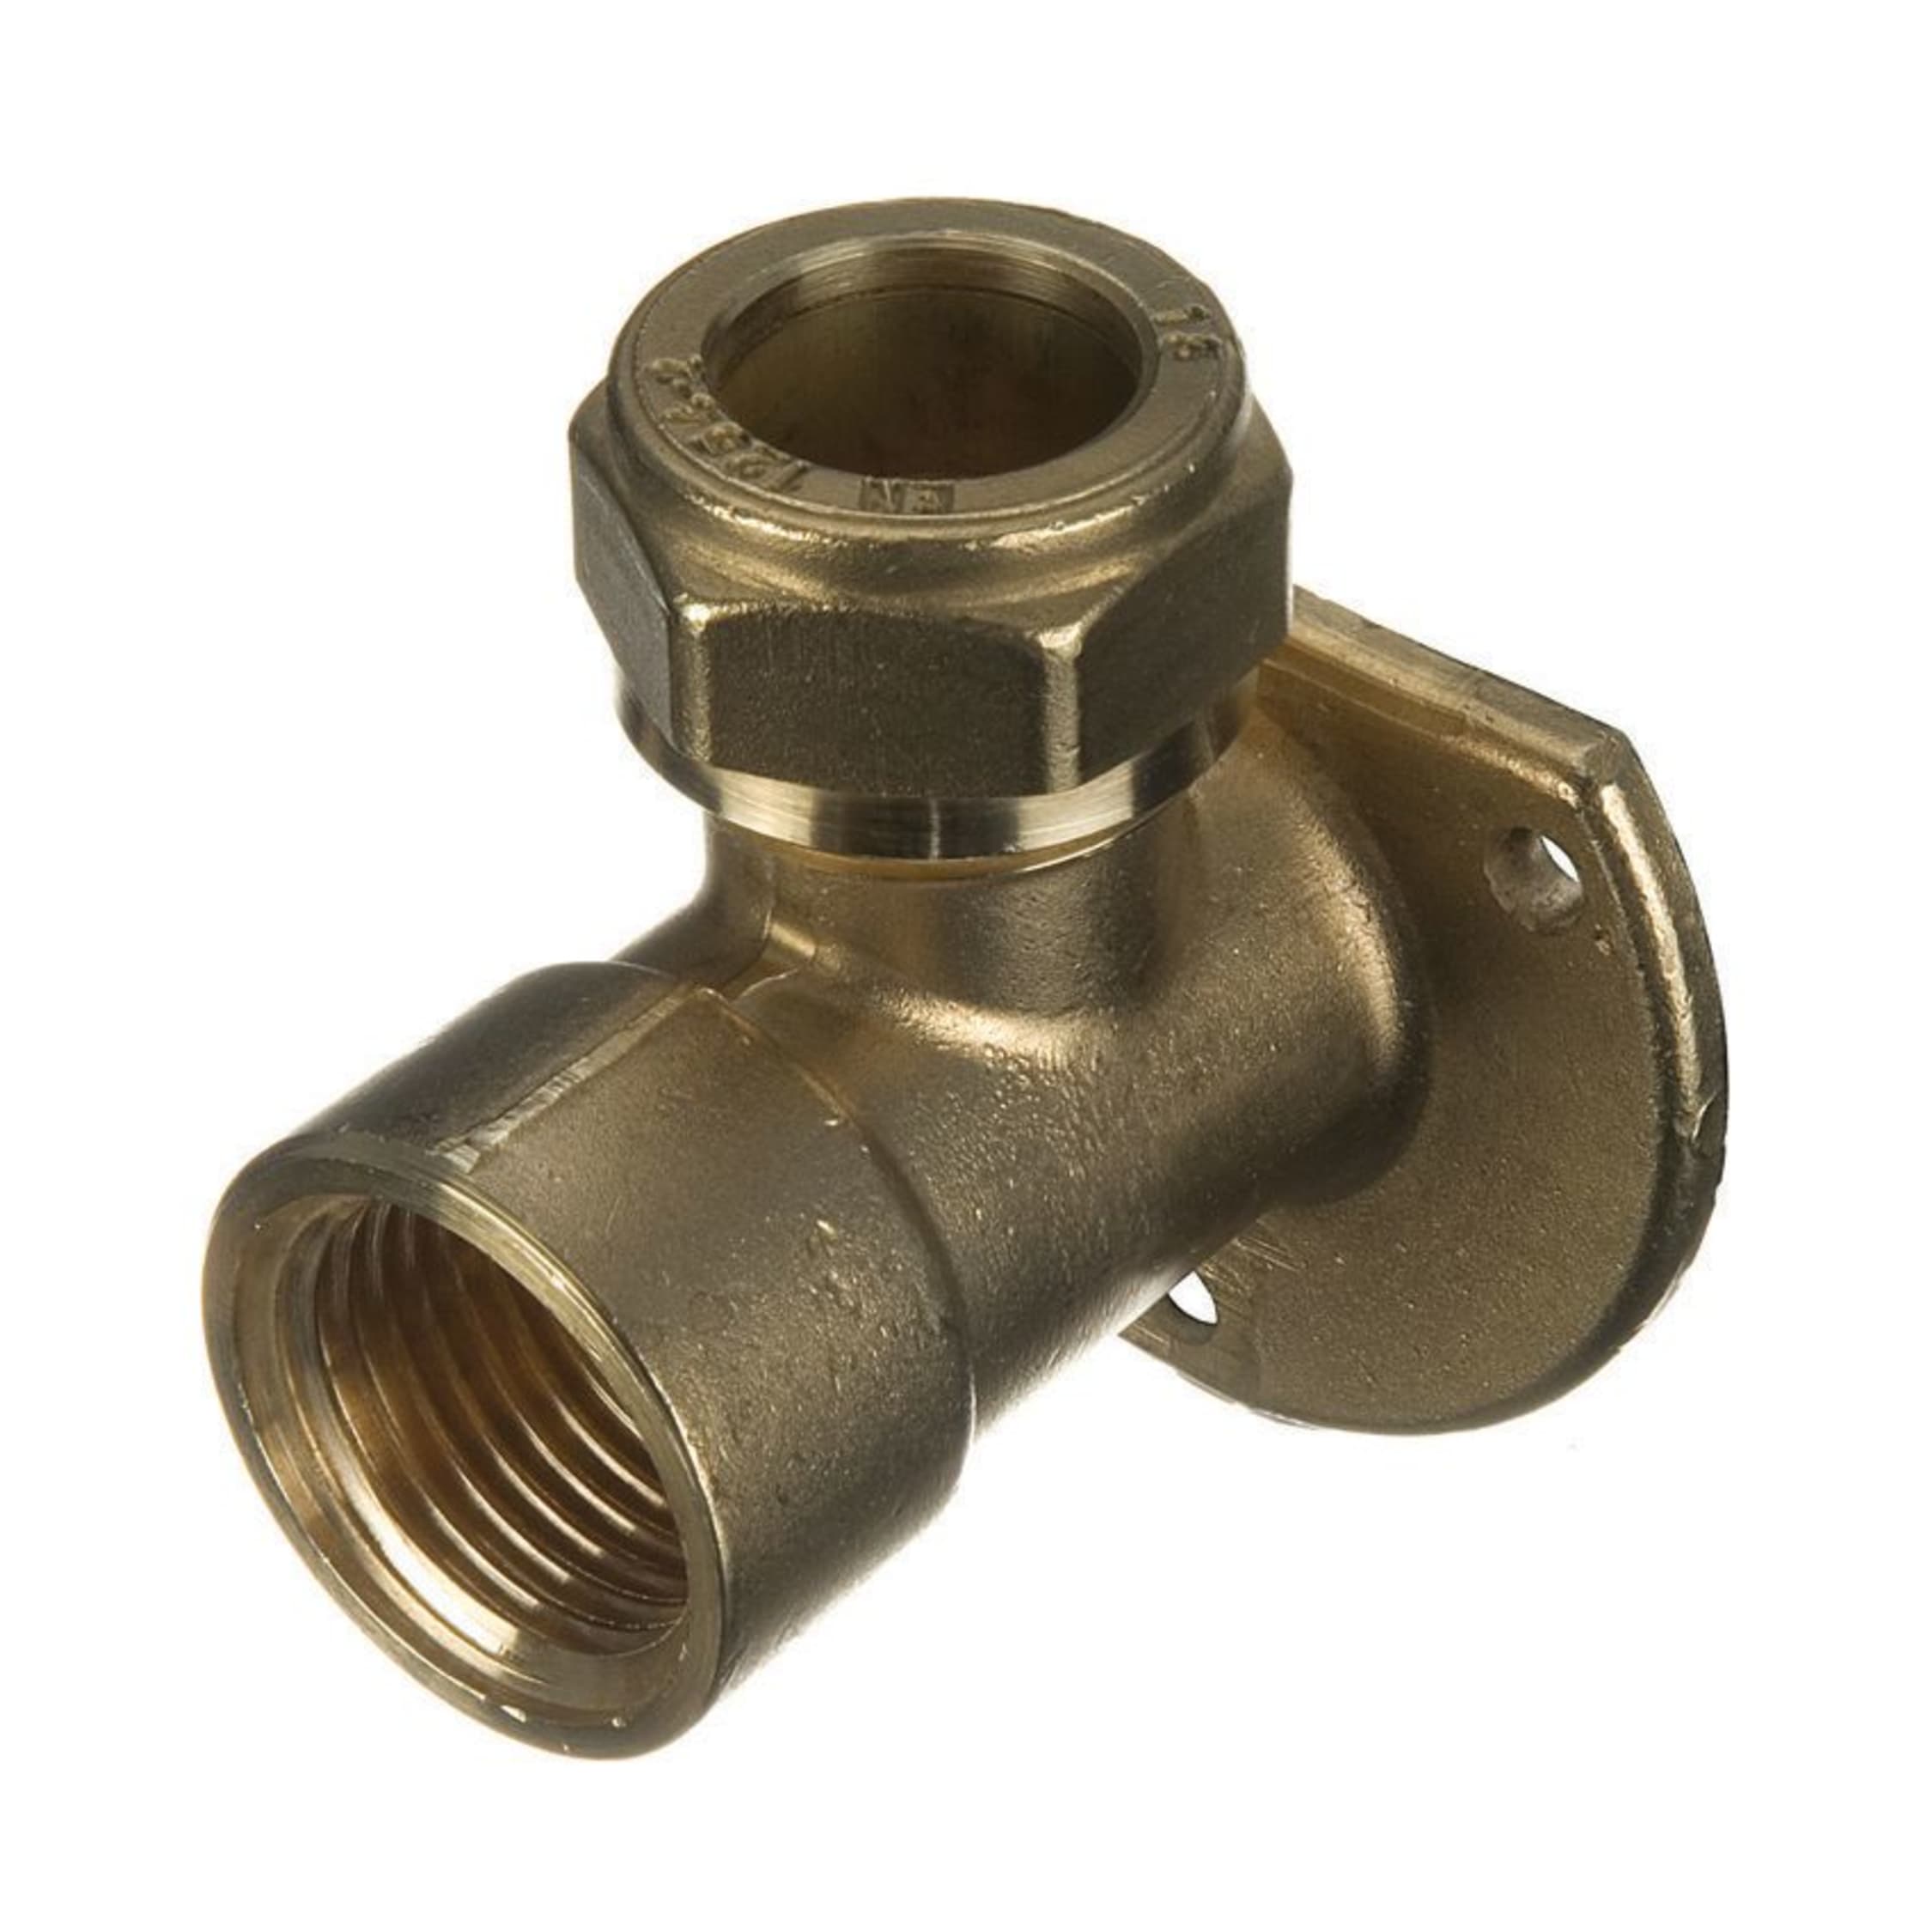 Details about   Outside Tap Wall Plate Elbow 90° Bend 15mm Compression x 1/2" BSP Brass Fitting 